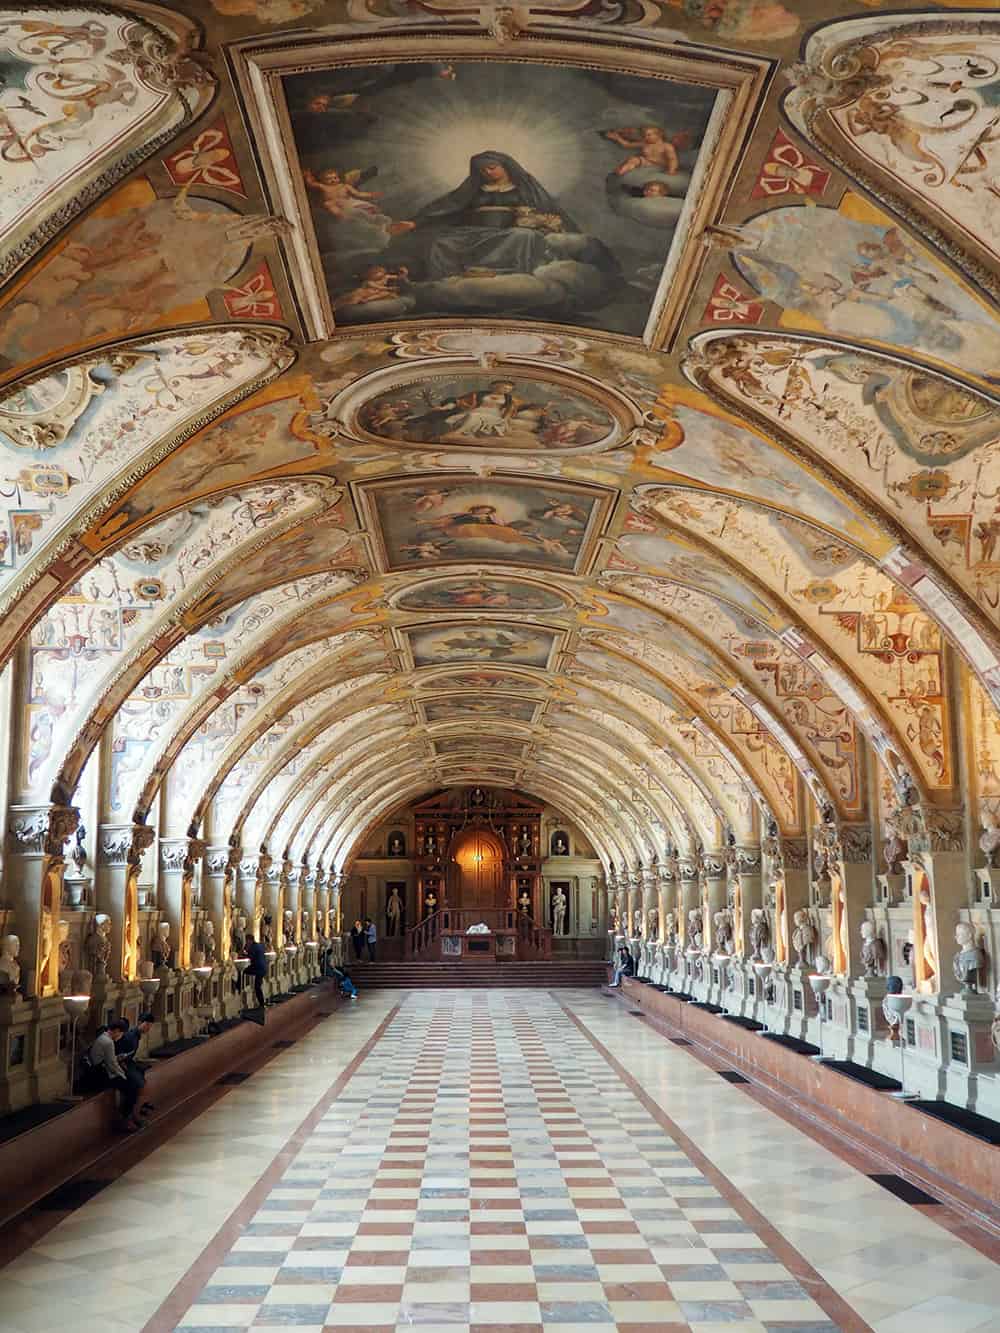 The Munich Residenz in Germany is has 10 court yards and 130 rooms open to the public. Opening in the 1300s, it is still available for tour even showing damage from World War 2. | via Autumn All Along